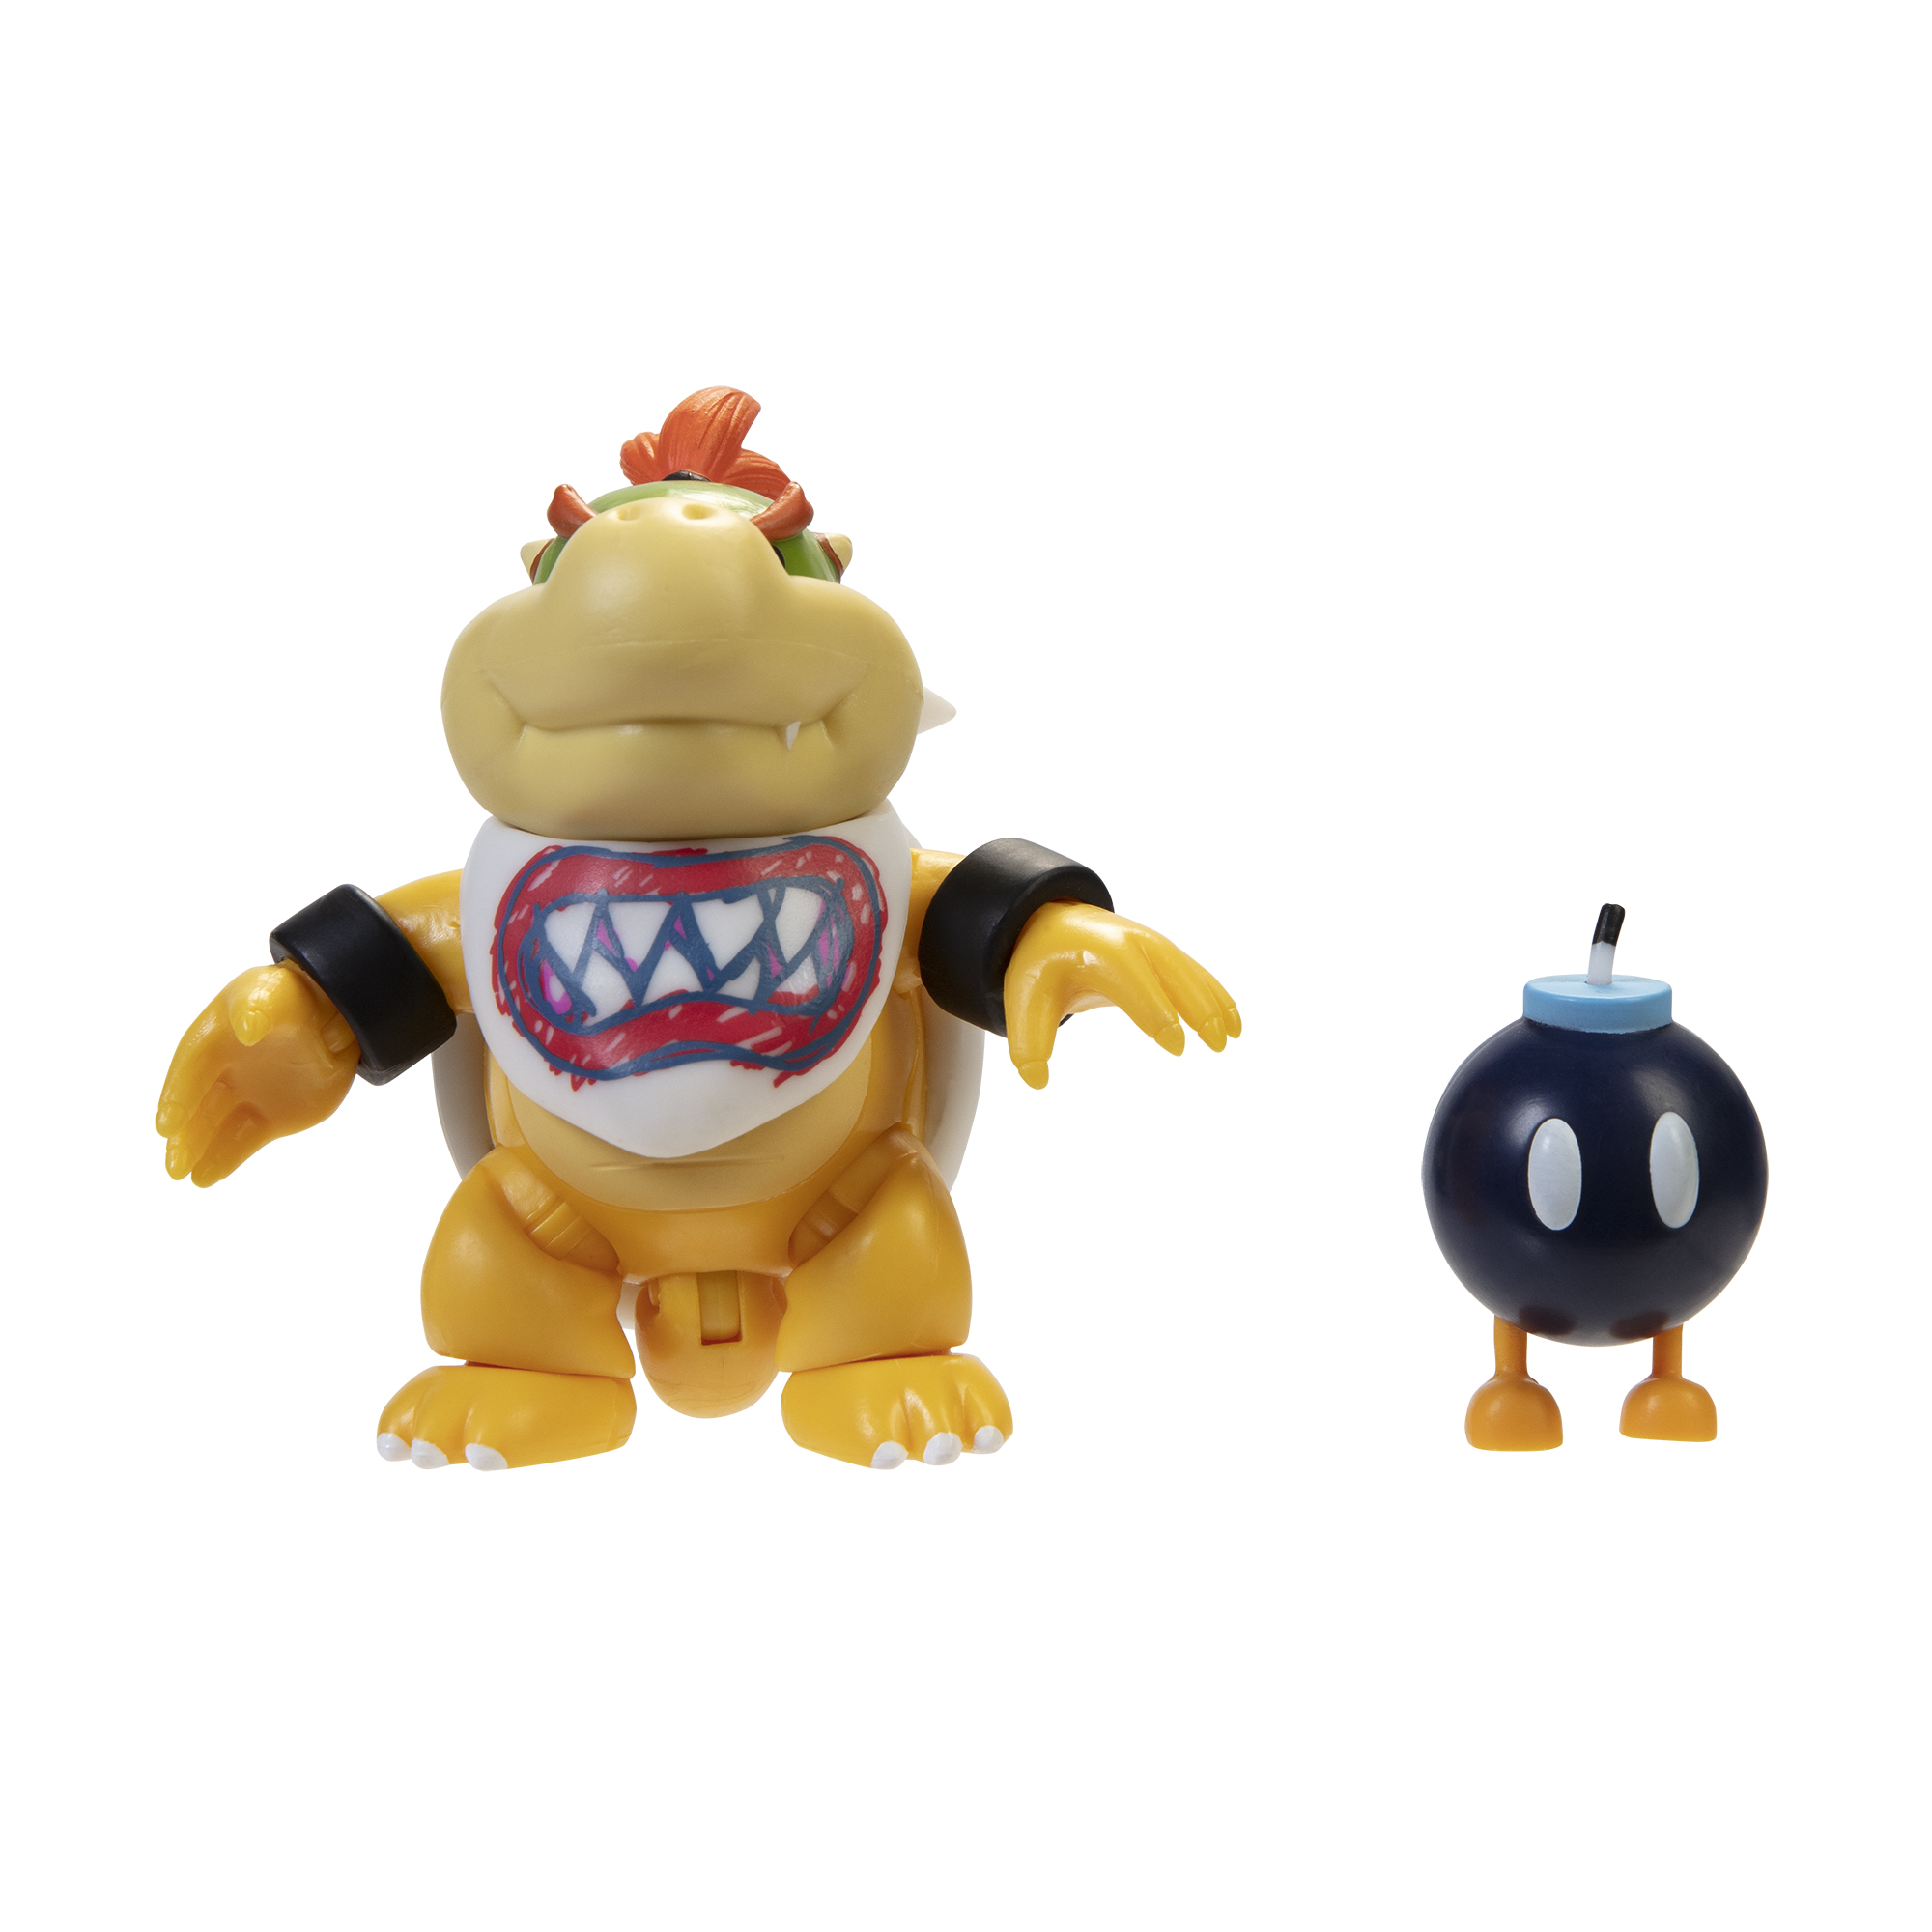 Bowser Jr with Bob-Omb 4-inch Articulated Figure - JAKKS Pacific, Inc.